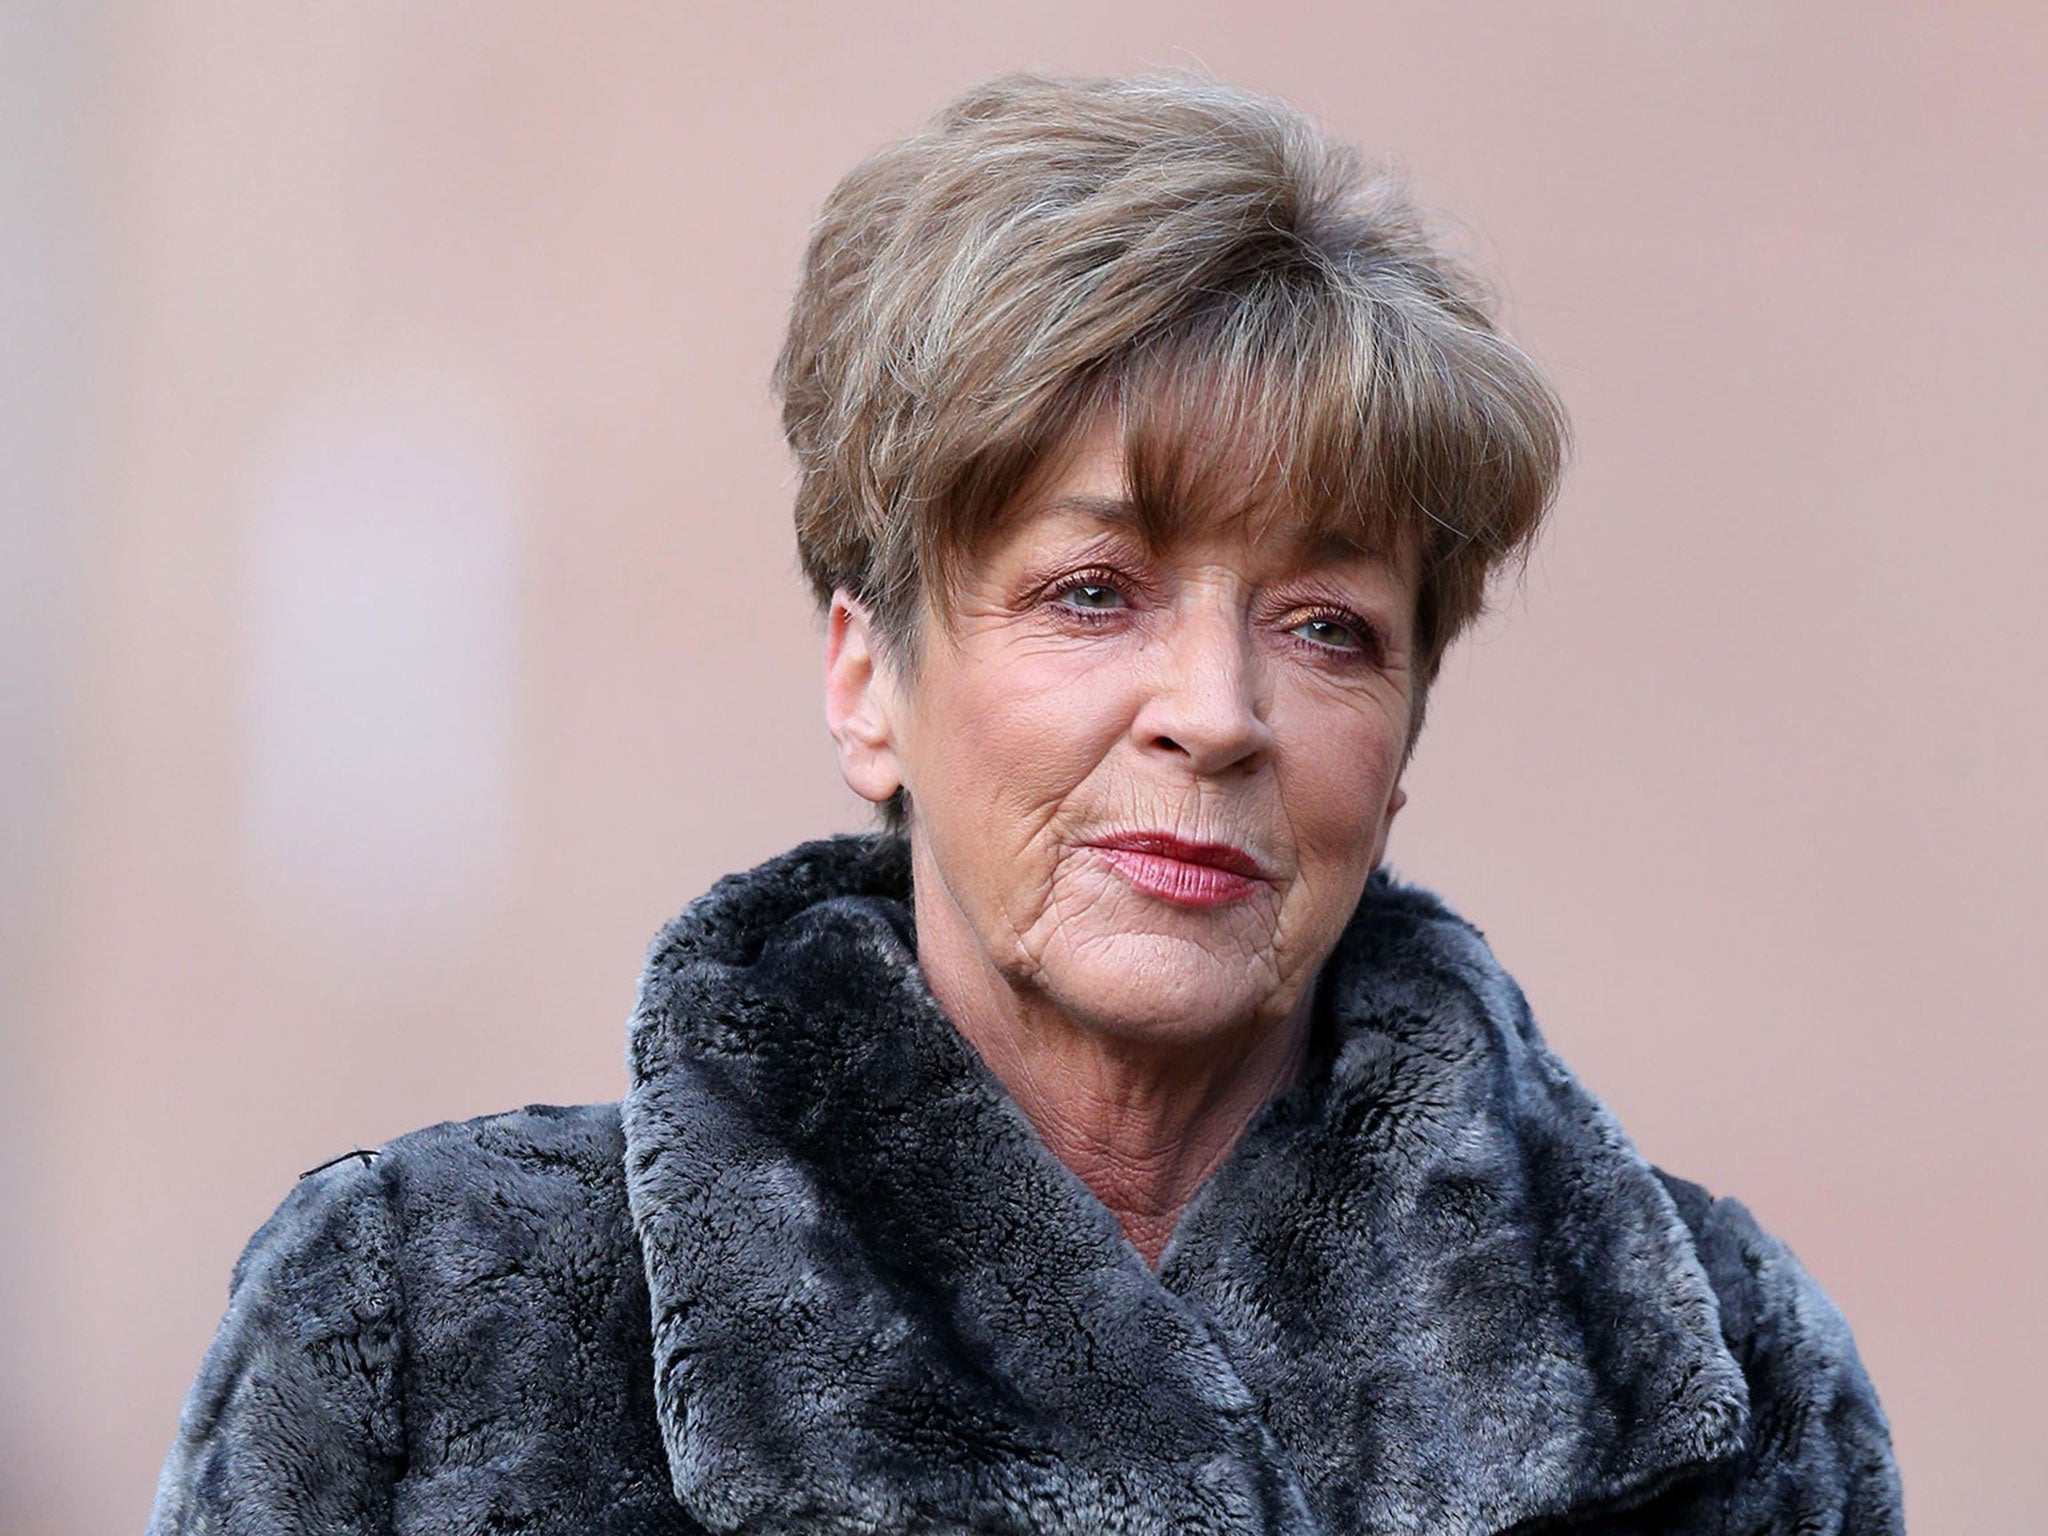 Late actress Anne Kirkbride played Deirdre Barlow in Coronation Street